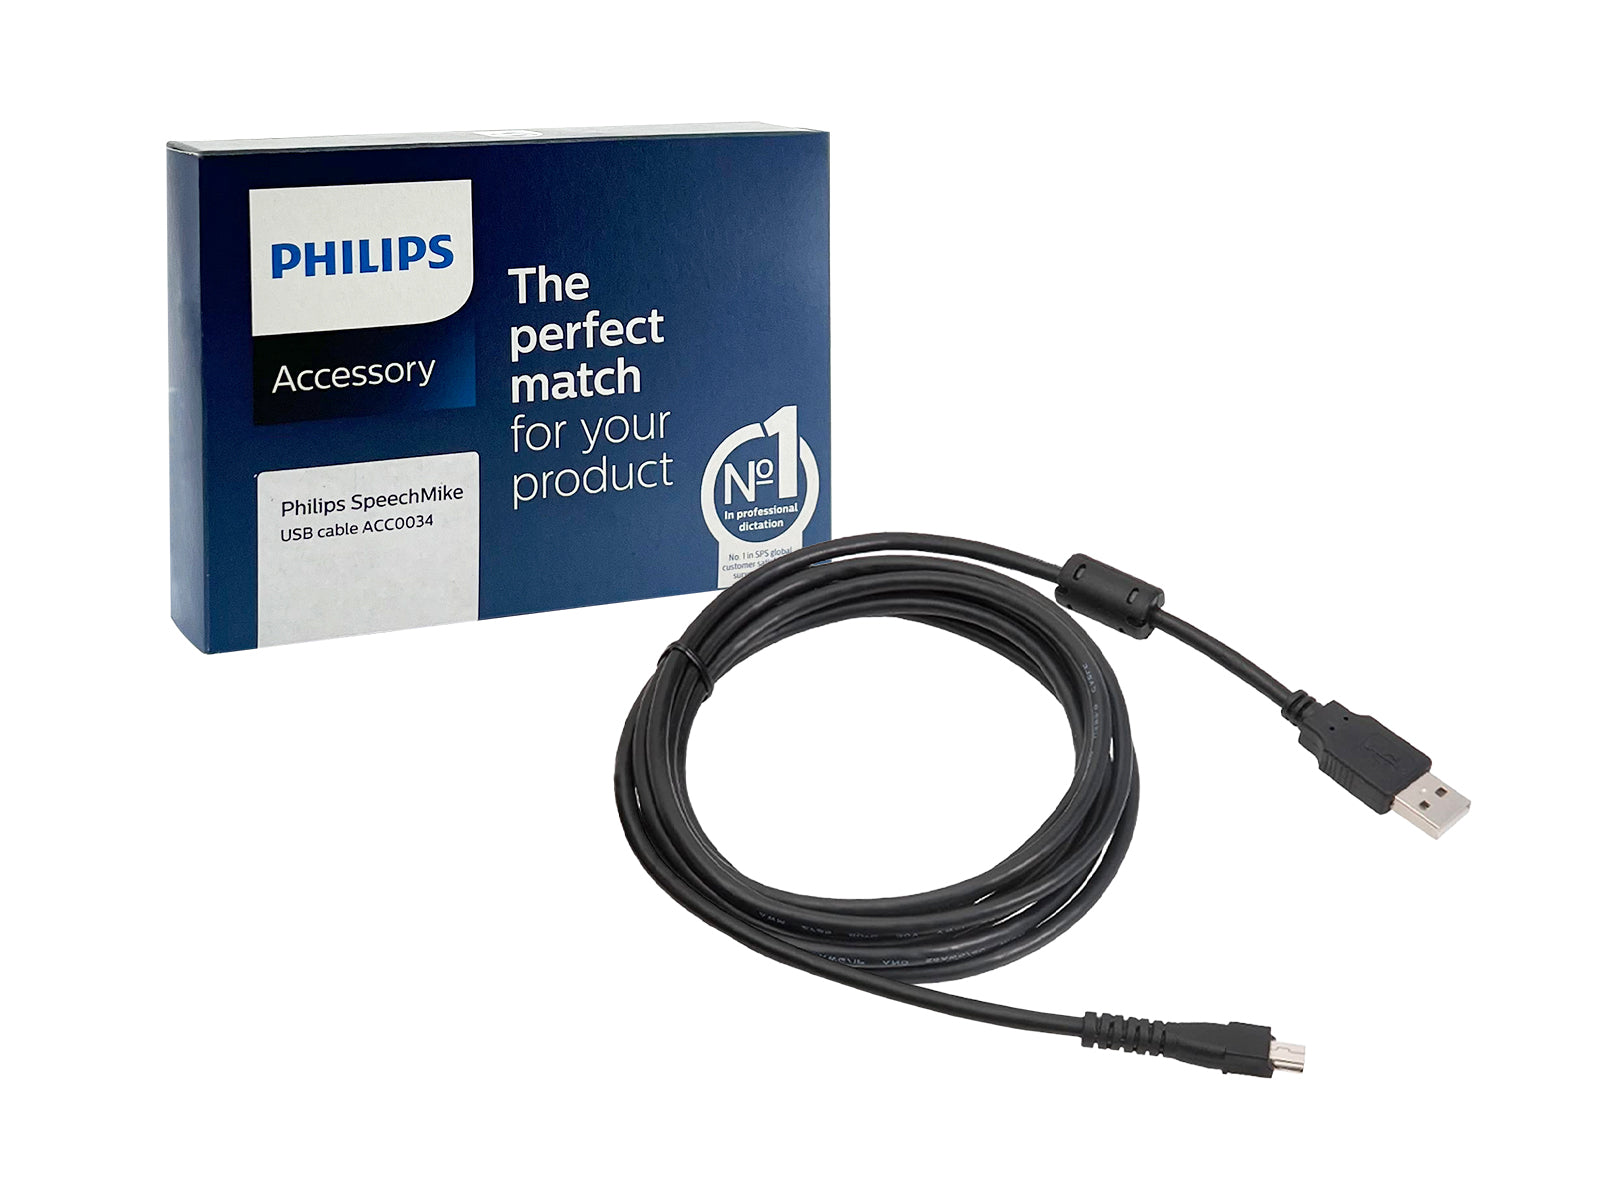 Philips OEM Replacement USB Cable for Speechmike Microphones - 8ft | 2.4m (ACC0034) Monitors.com 